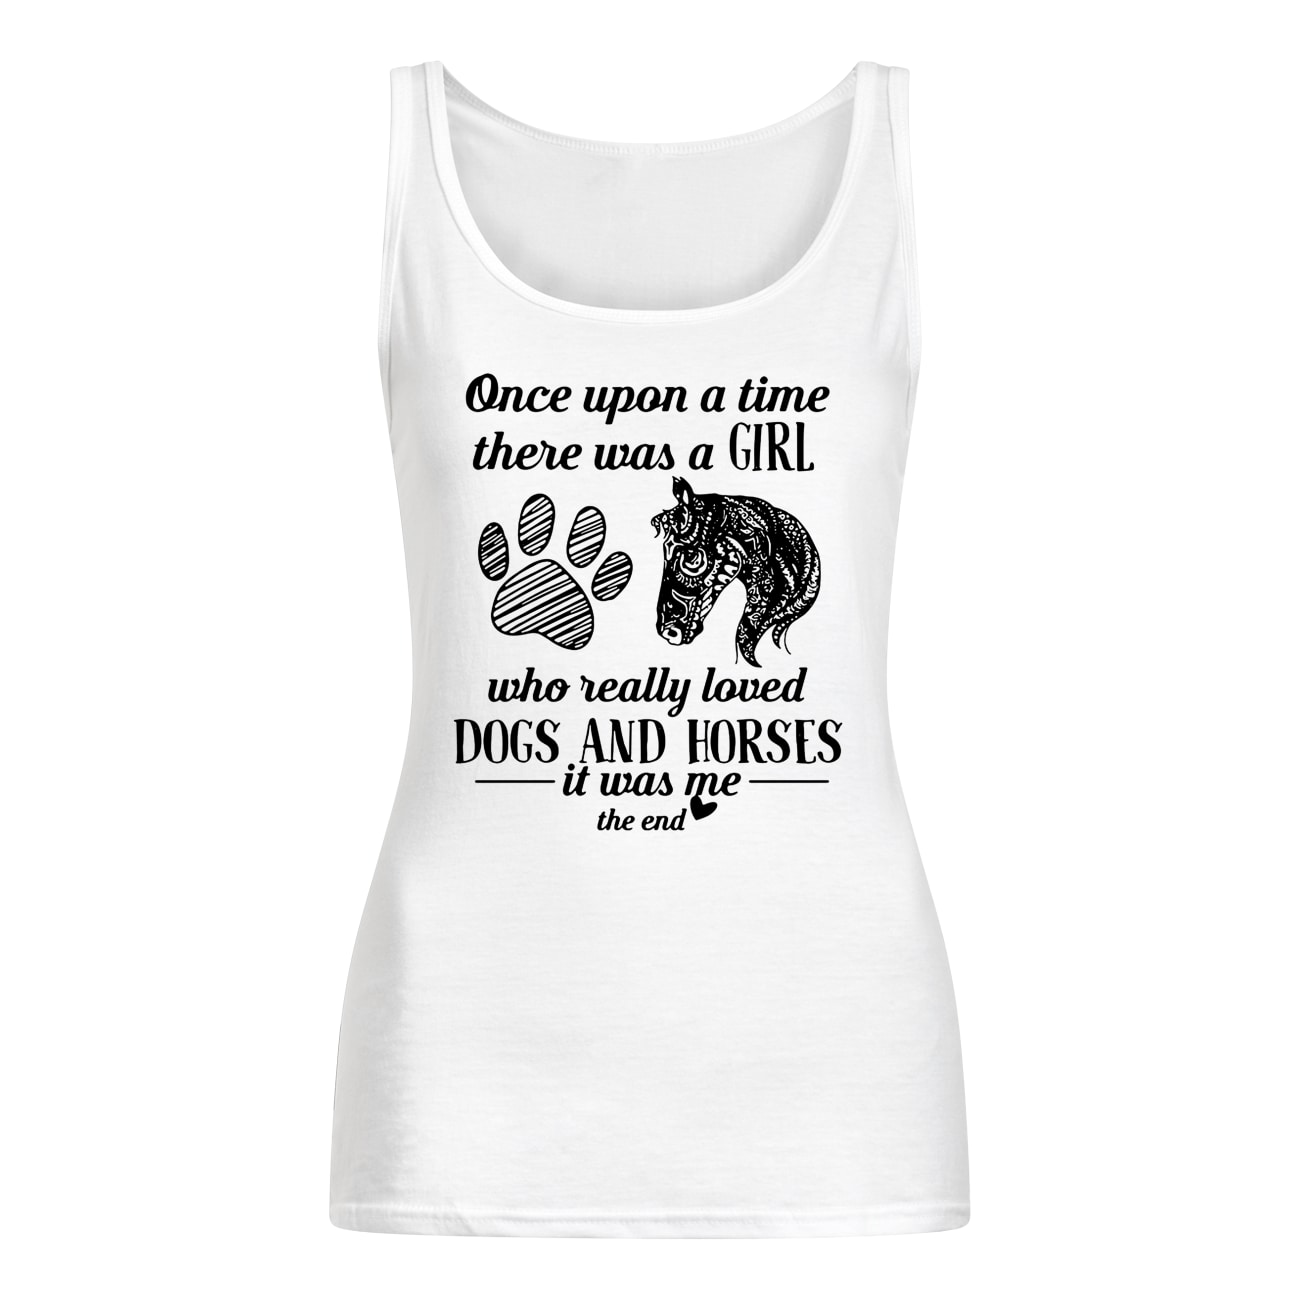 Once upon a time there was a girl who really loved dogs and horses it was me tank top